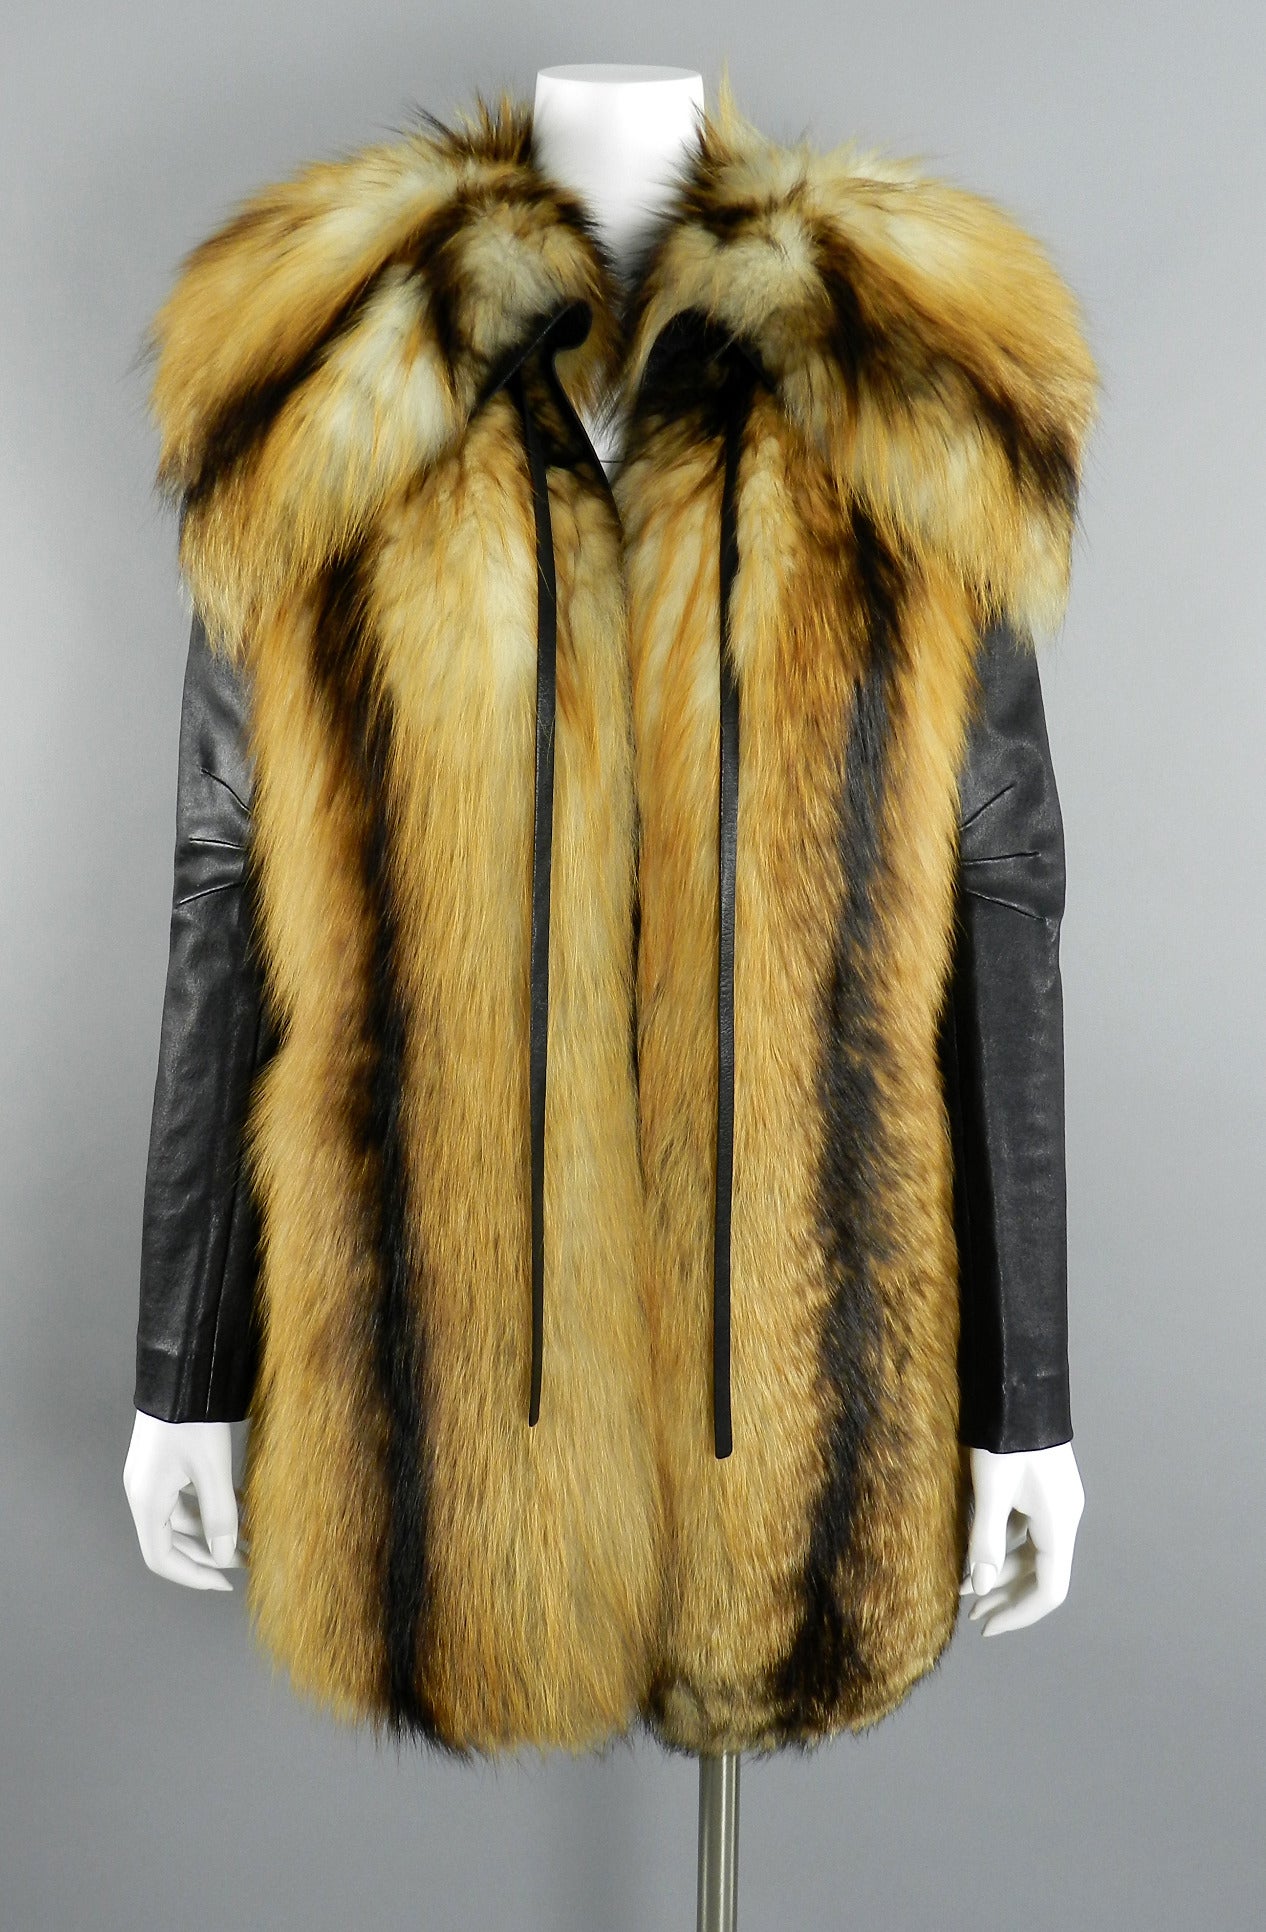 J. Mendel red fox fur coat with removable leather sleeves. Converts into vest.  Light fall-weight so not a heavy winter coat. Stretch leather sleeves snap on and of. Sides of vest have slits up to the waist and have a black leather buckle accent.